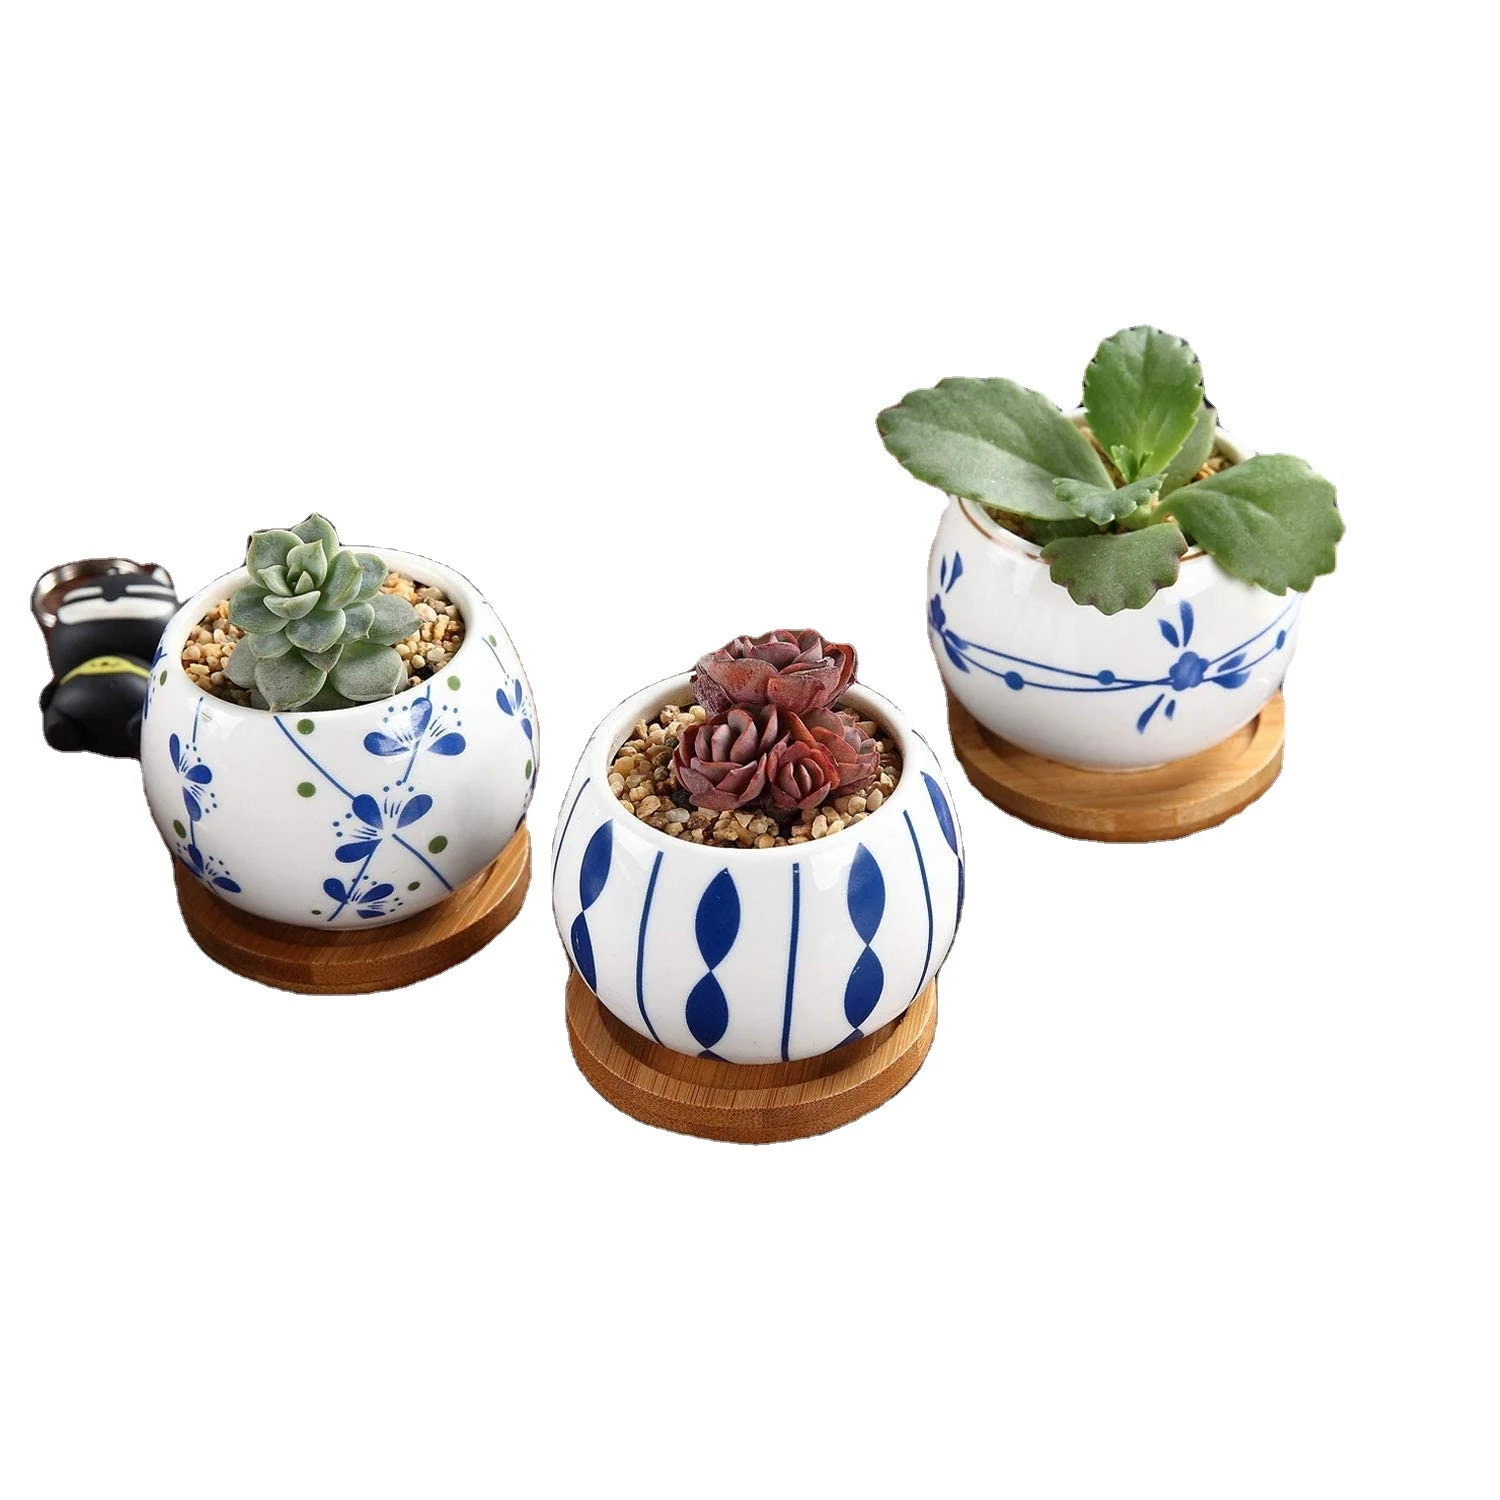 2.5 Inch Ceramic Succulent Planter Pot with Bamboo Saucer Details about   Set of 3 